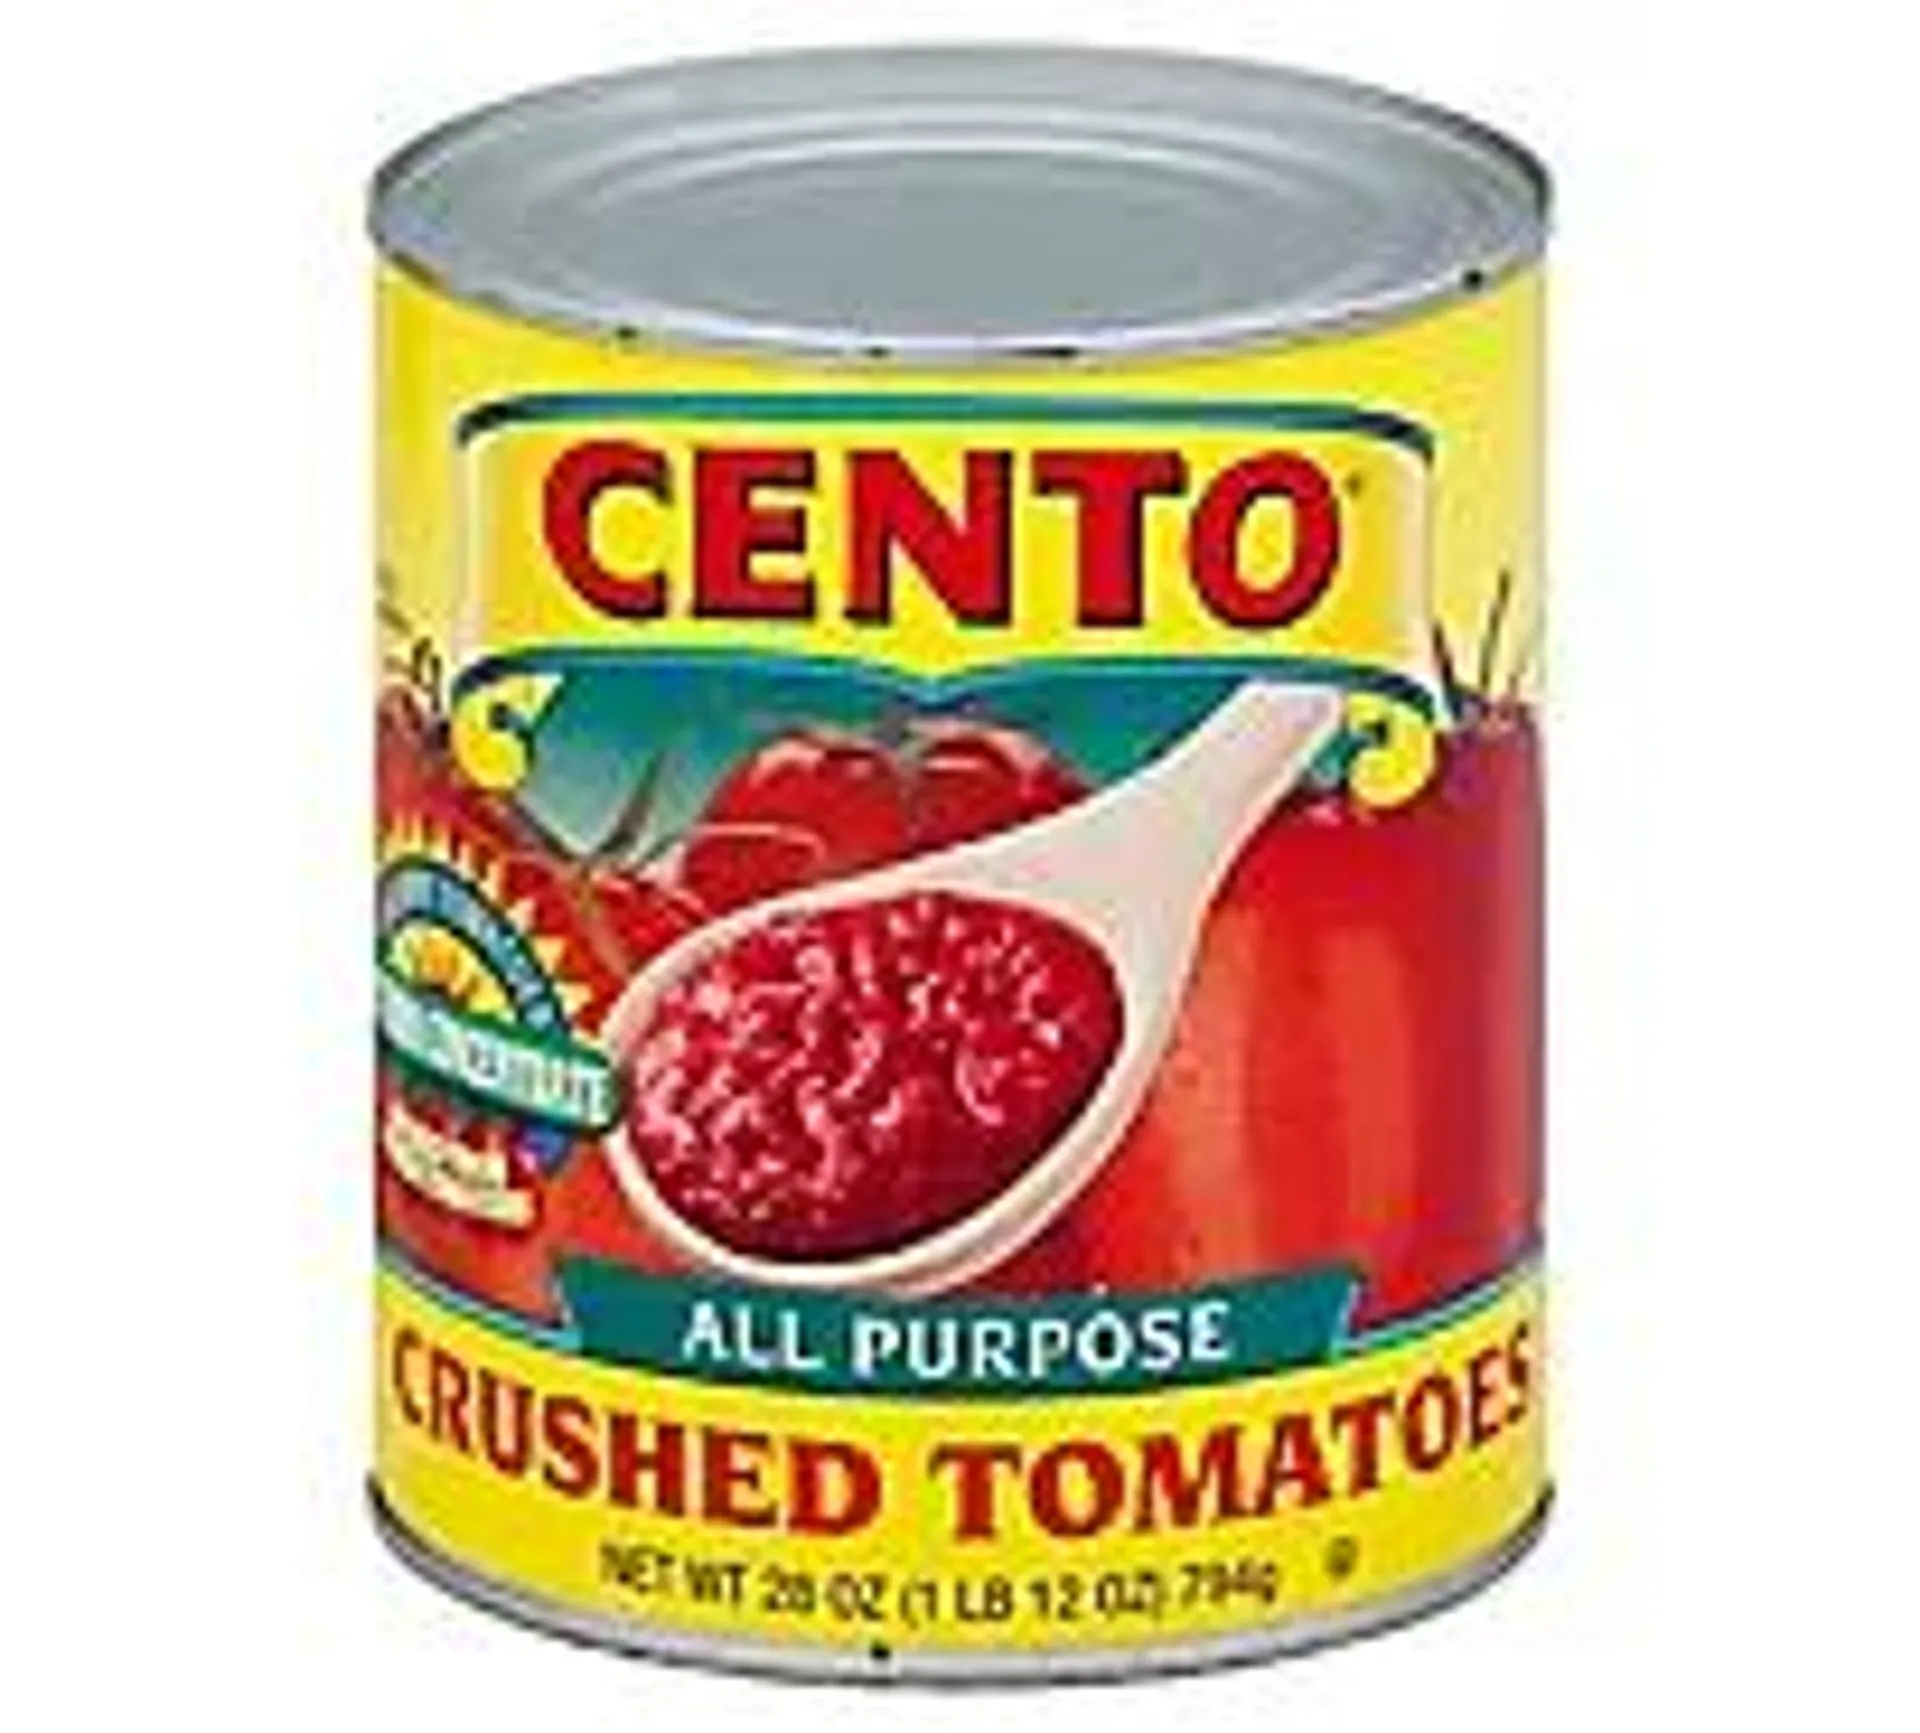 CENTO Tomatoes Crushed All Purpose - 28 Oz